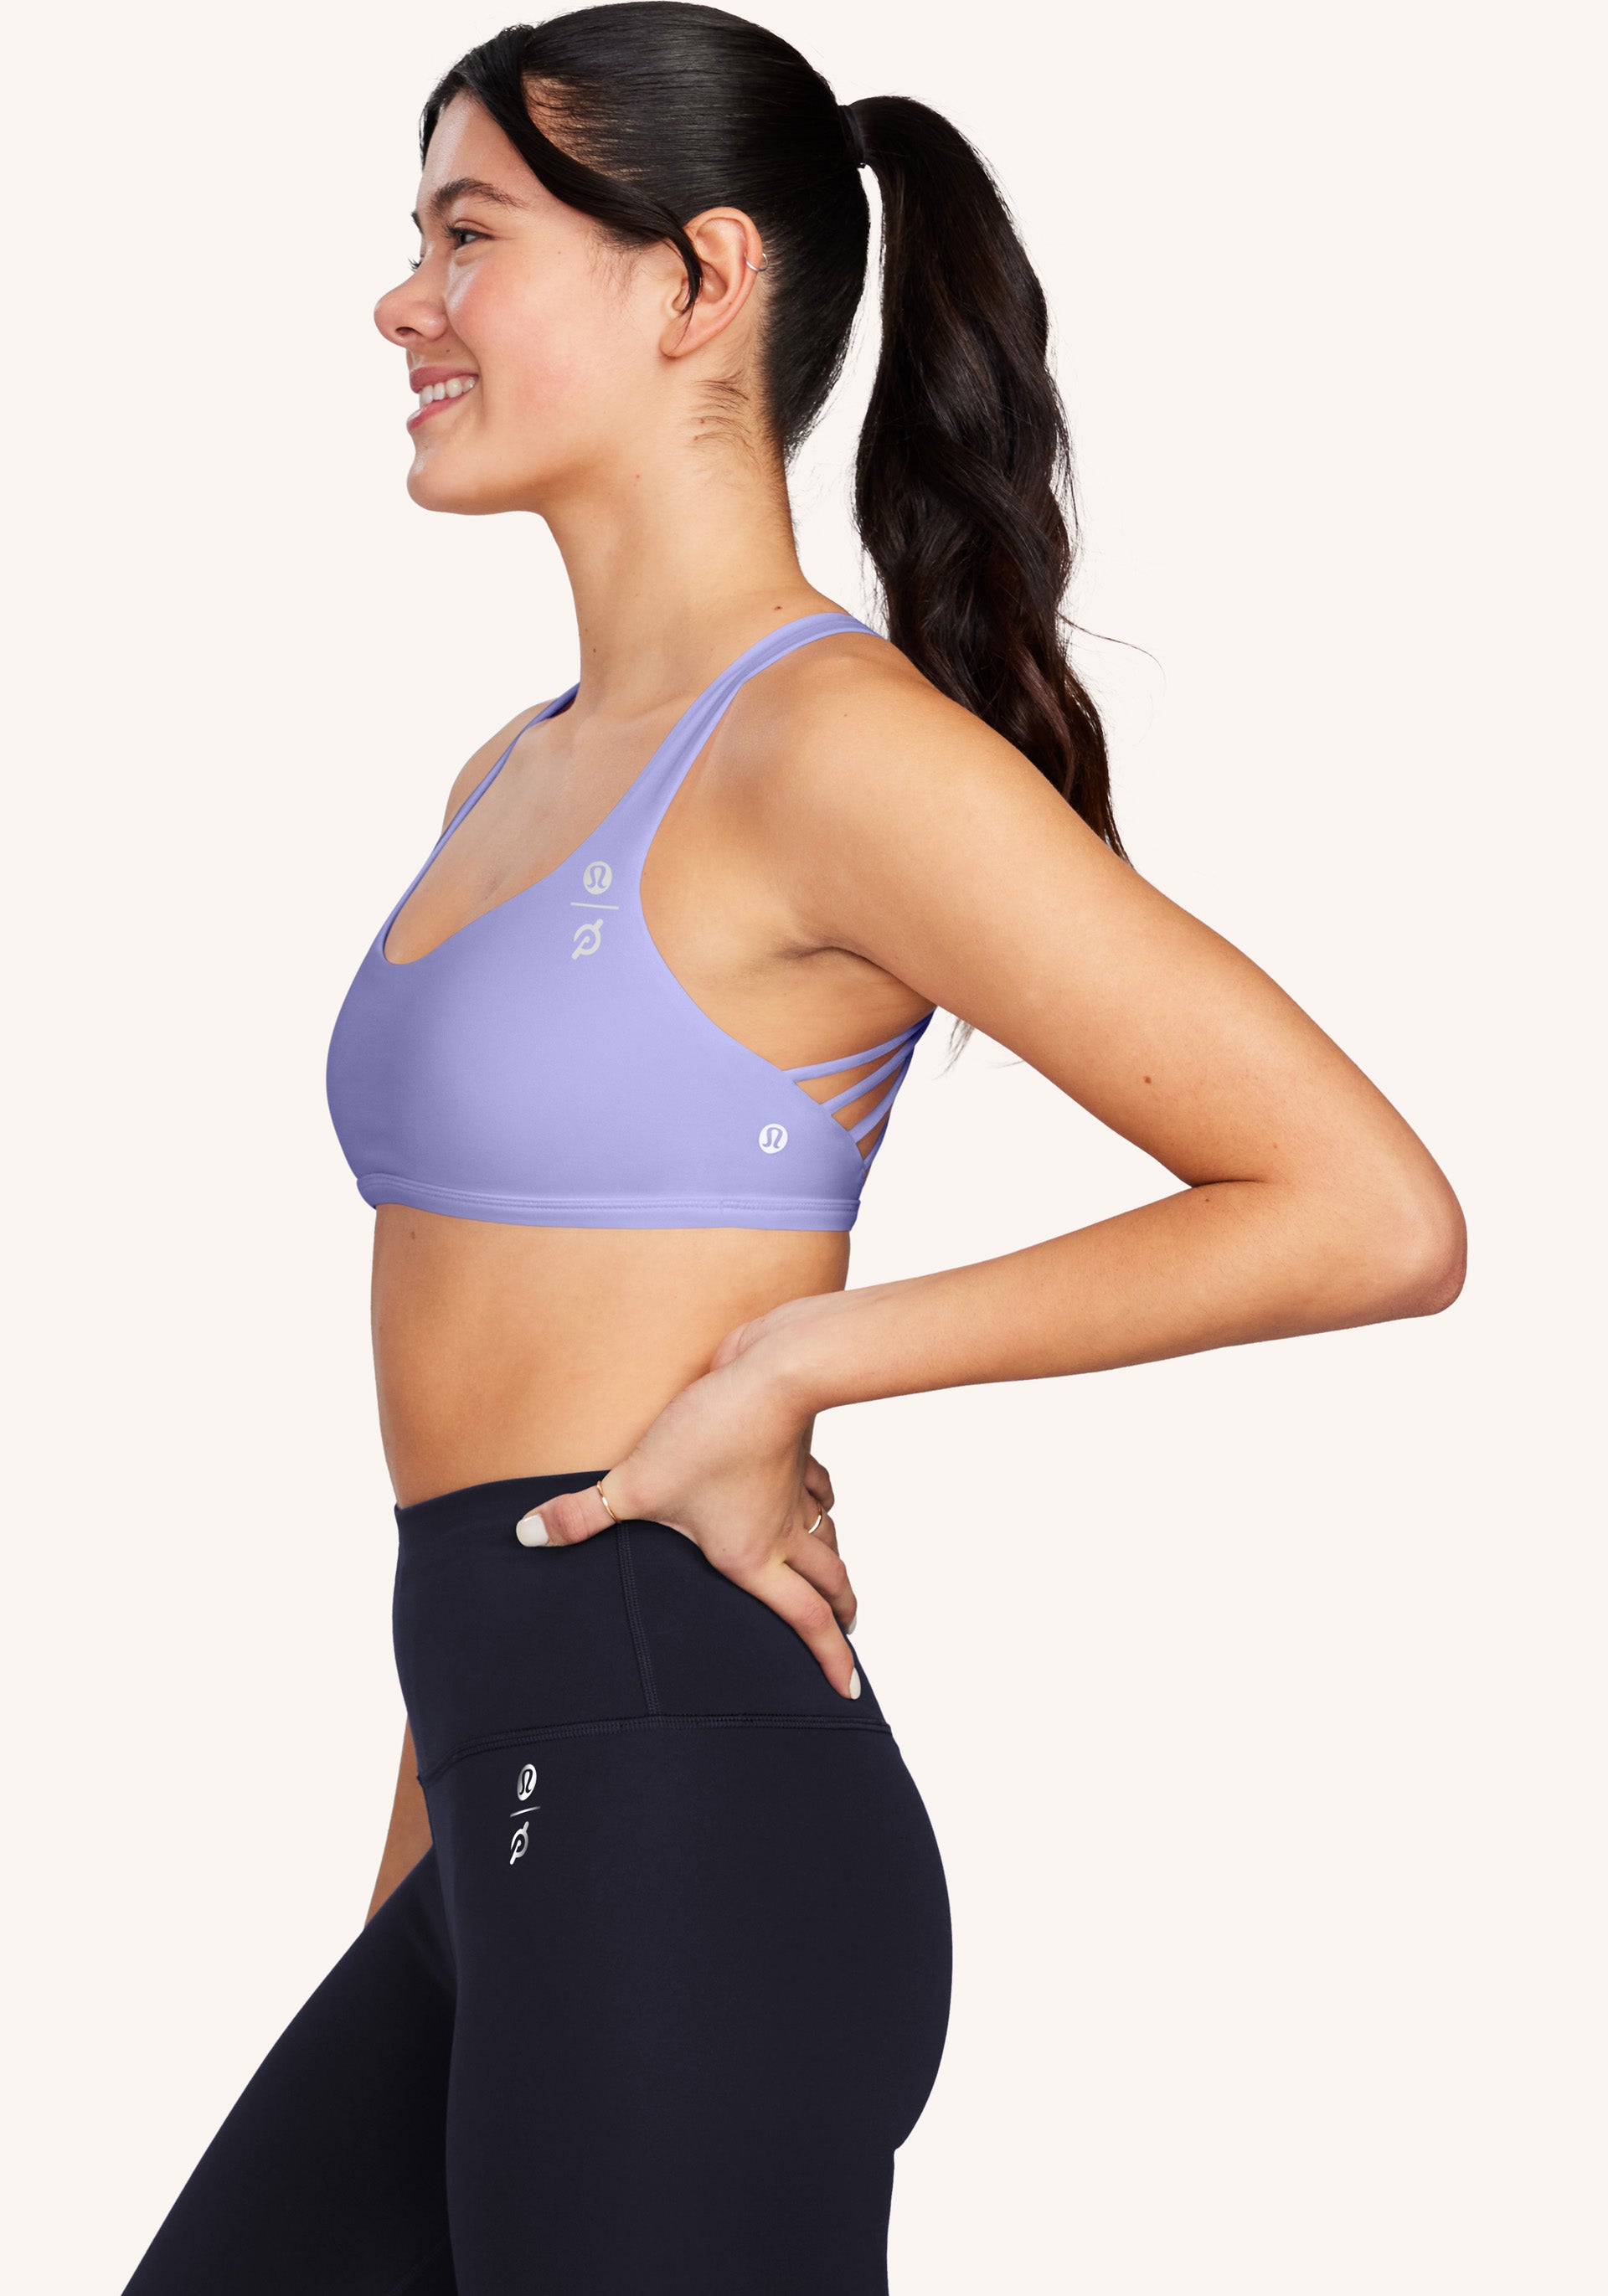 Lululemon athletica Free to Be Bra - Wild *Light Support, A/B Cup